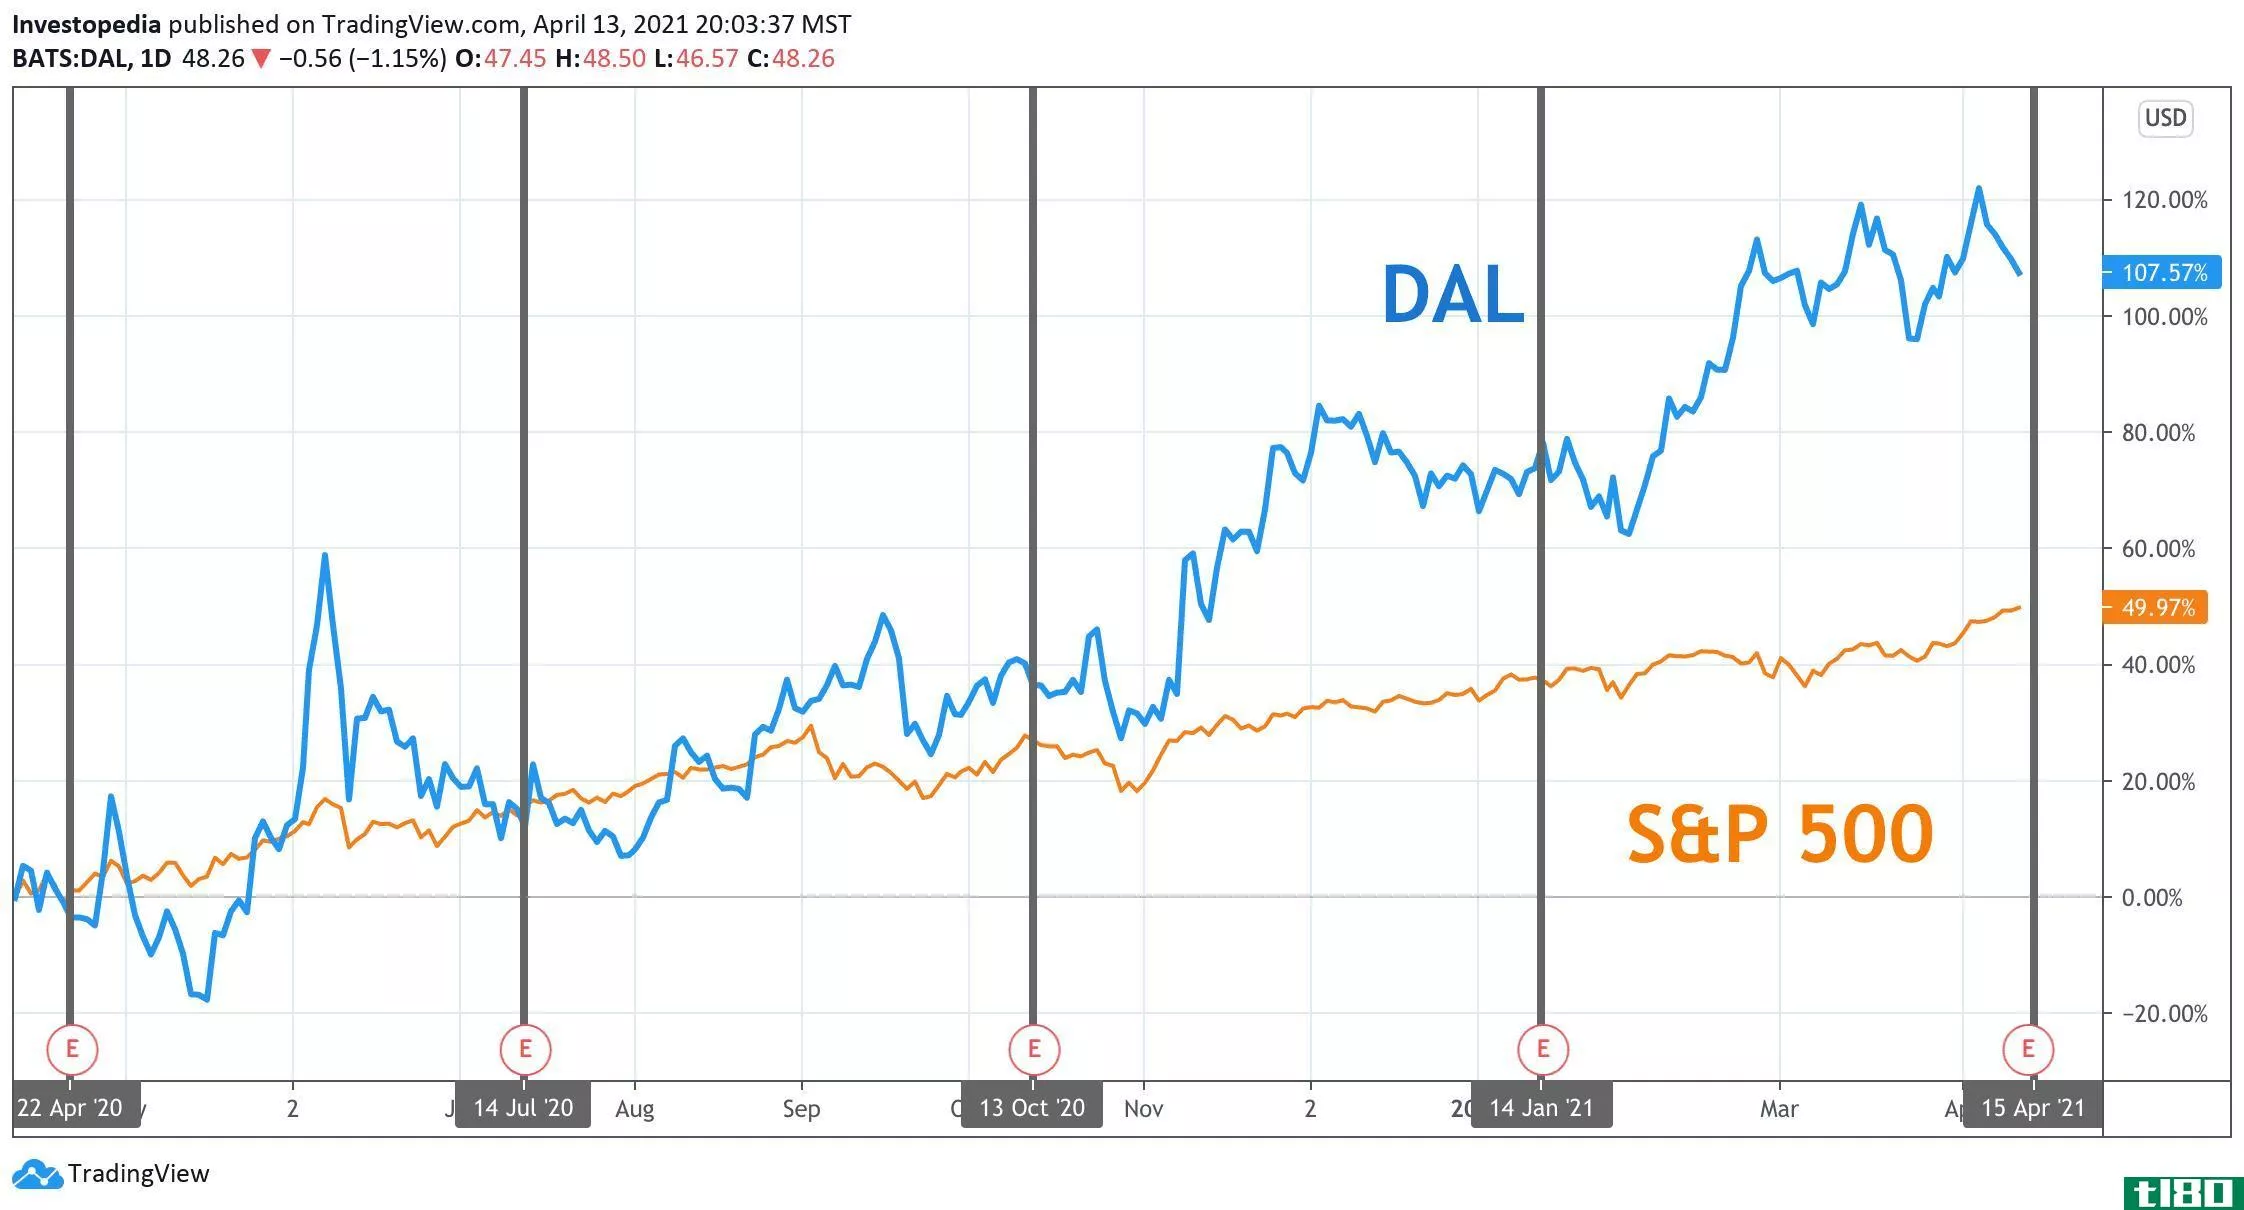 One Year Total Return for S&P 500 and Delta